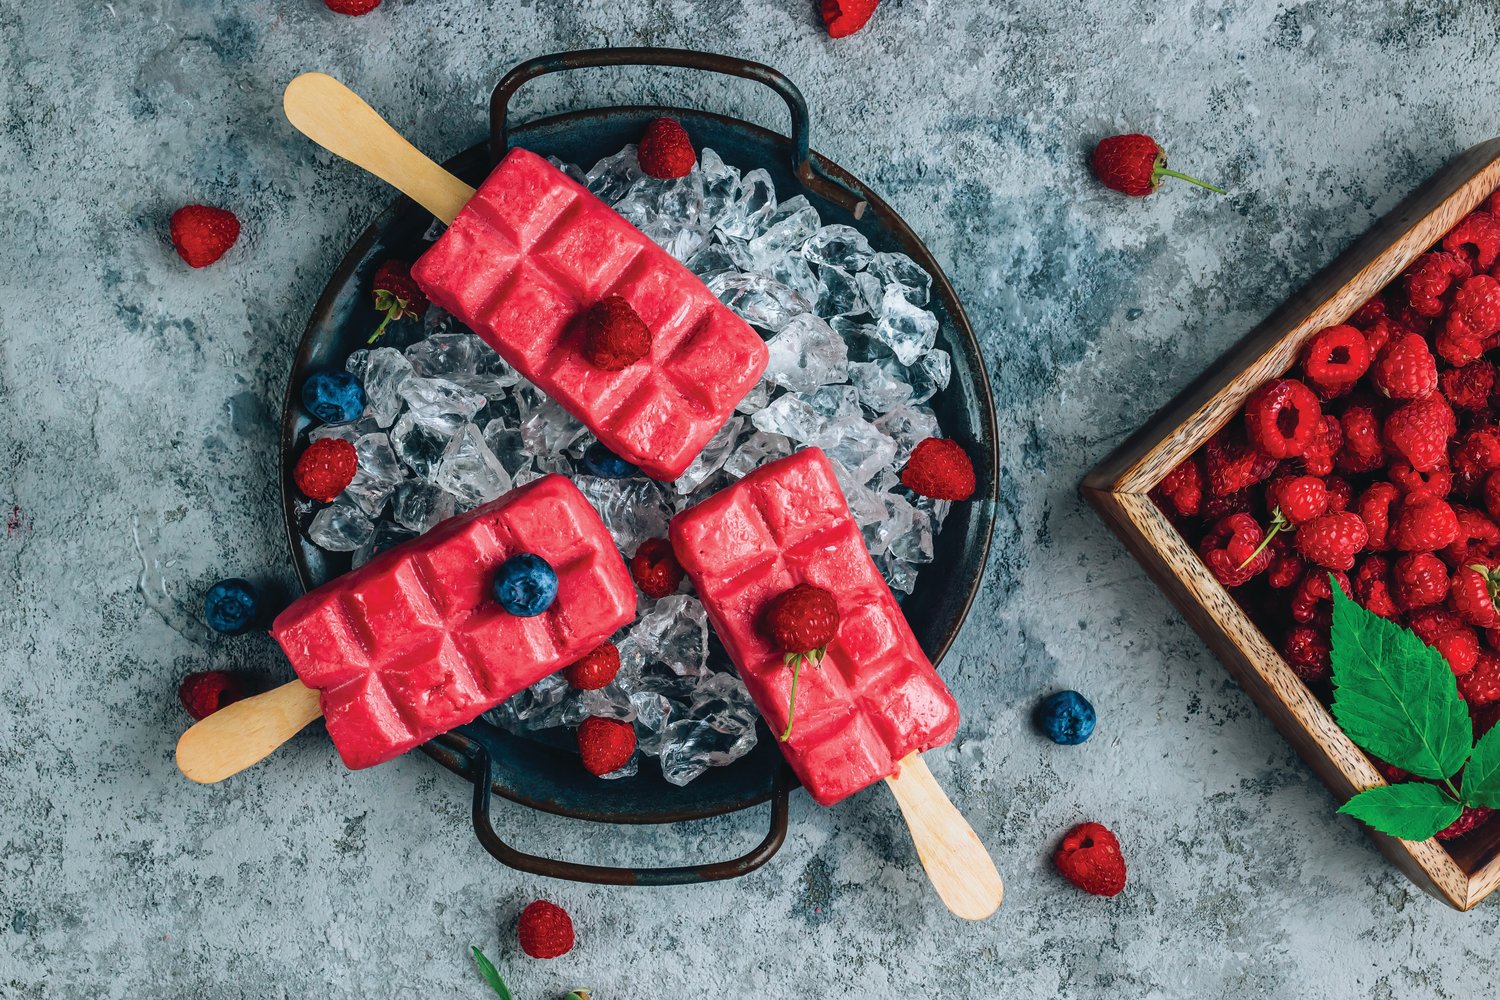 Homemade raspberry popsickles are a win-win summer treat.